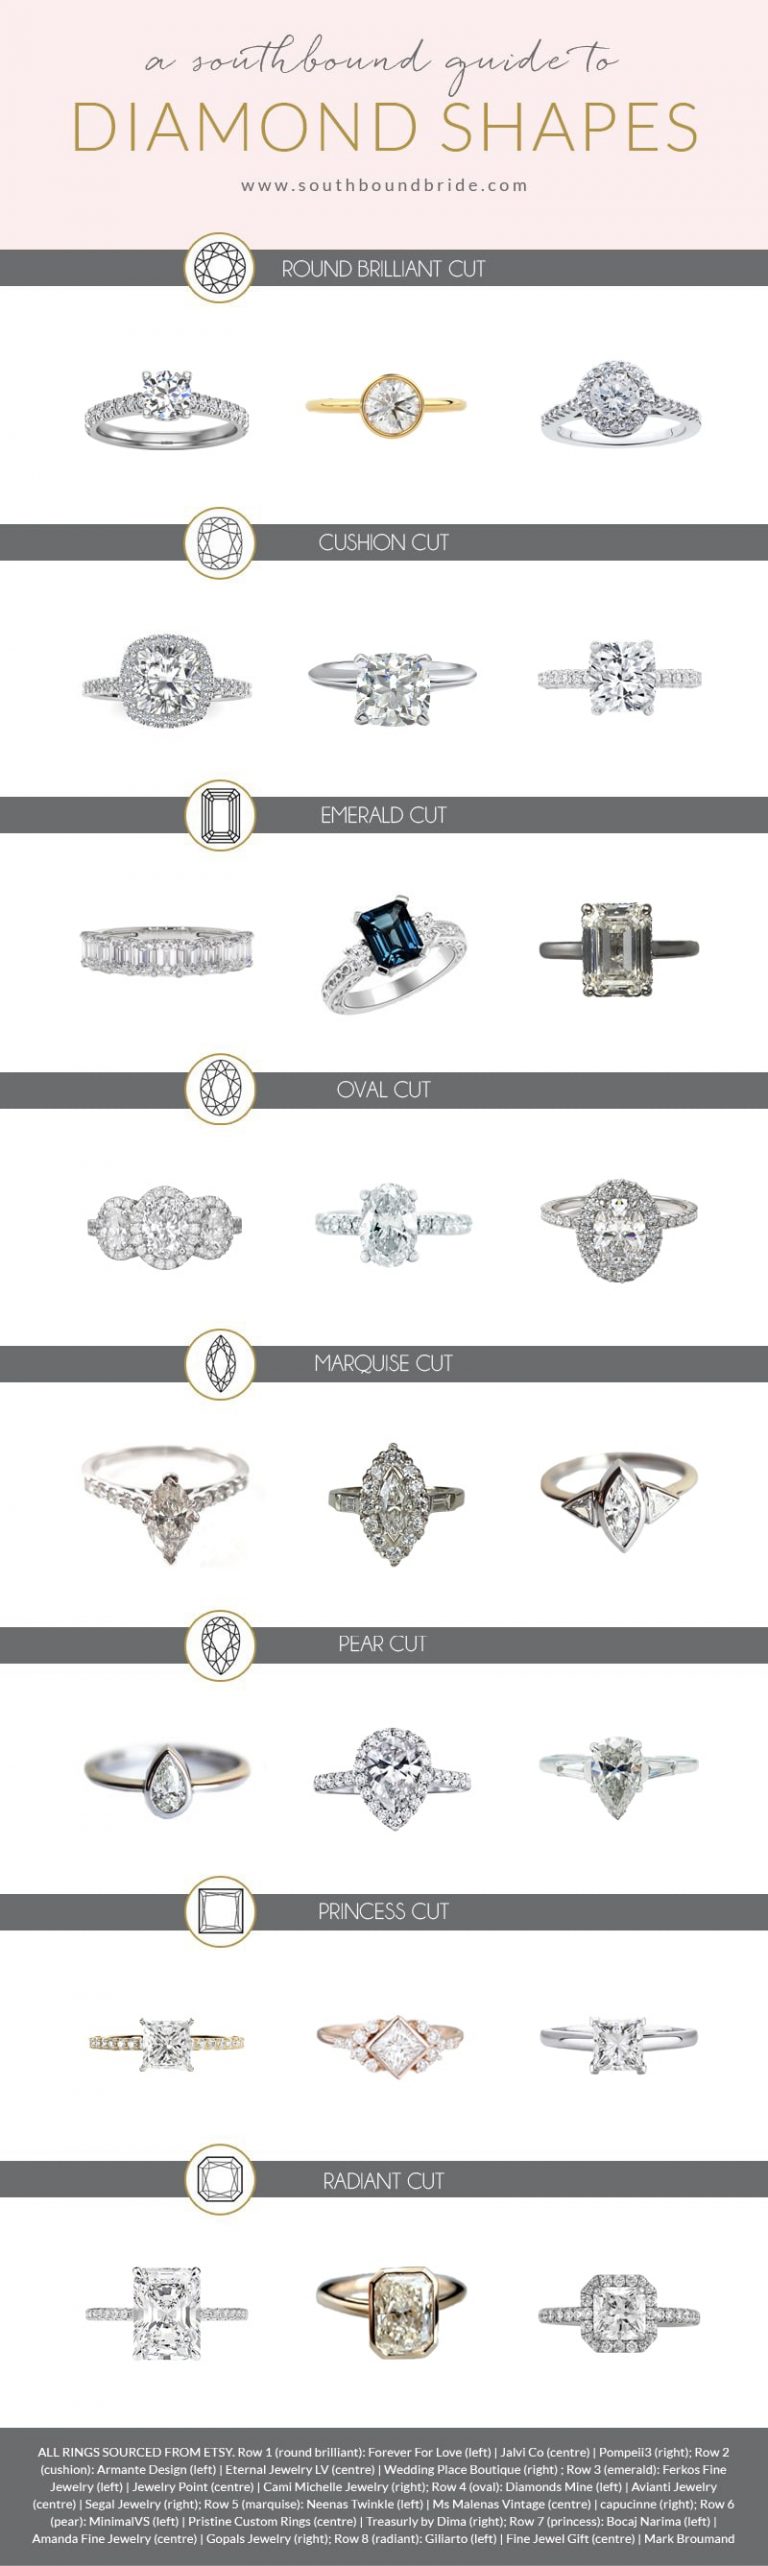 Engagement Rings Guide: Diamond Shapes | SouthBound Bride